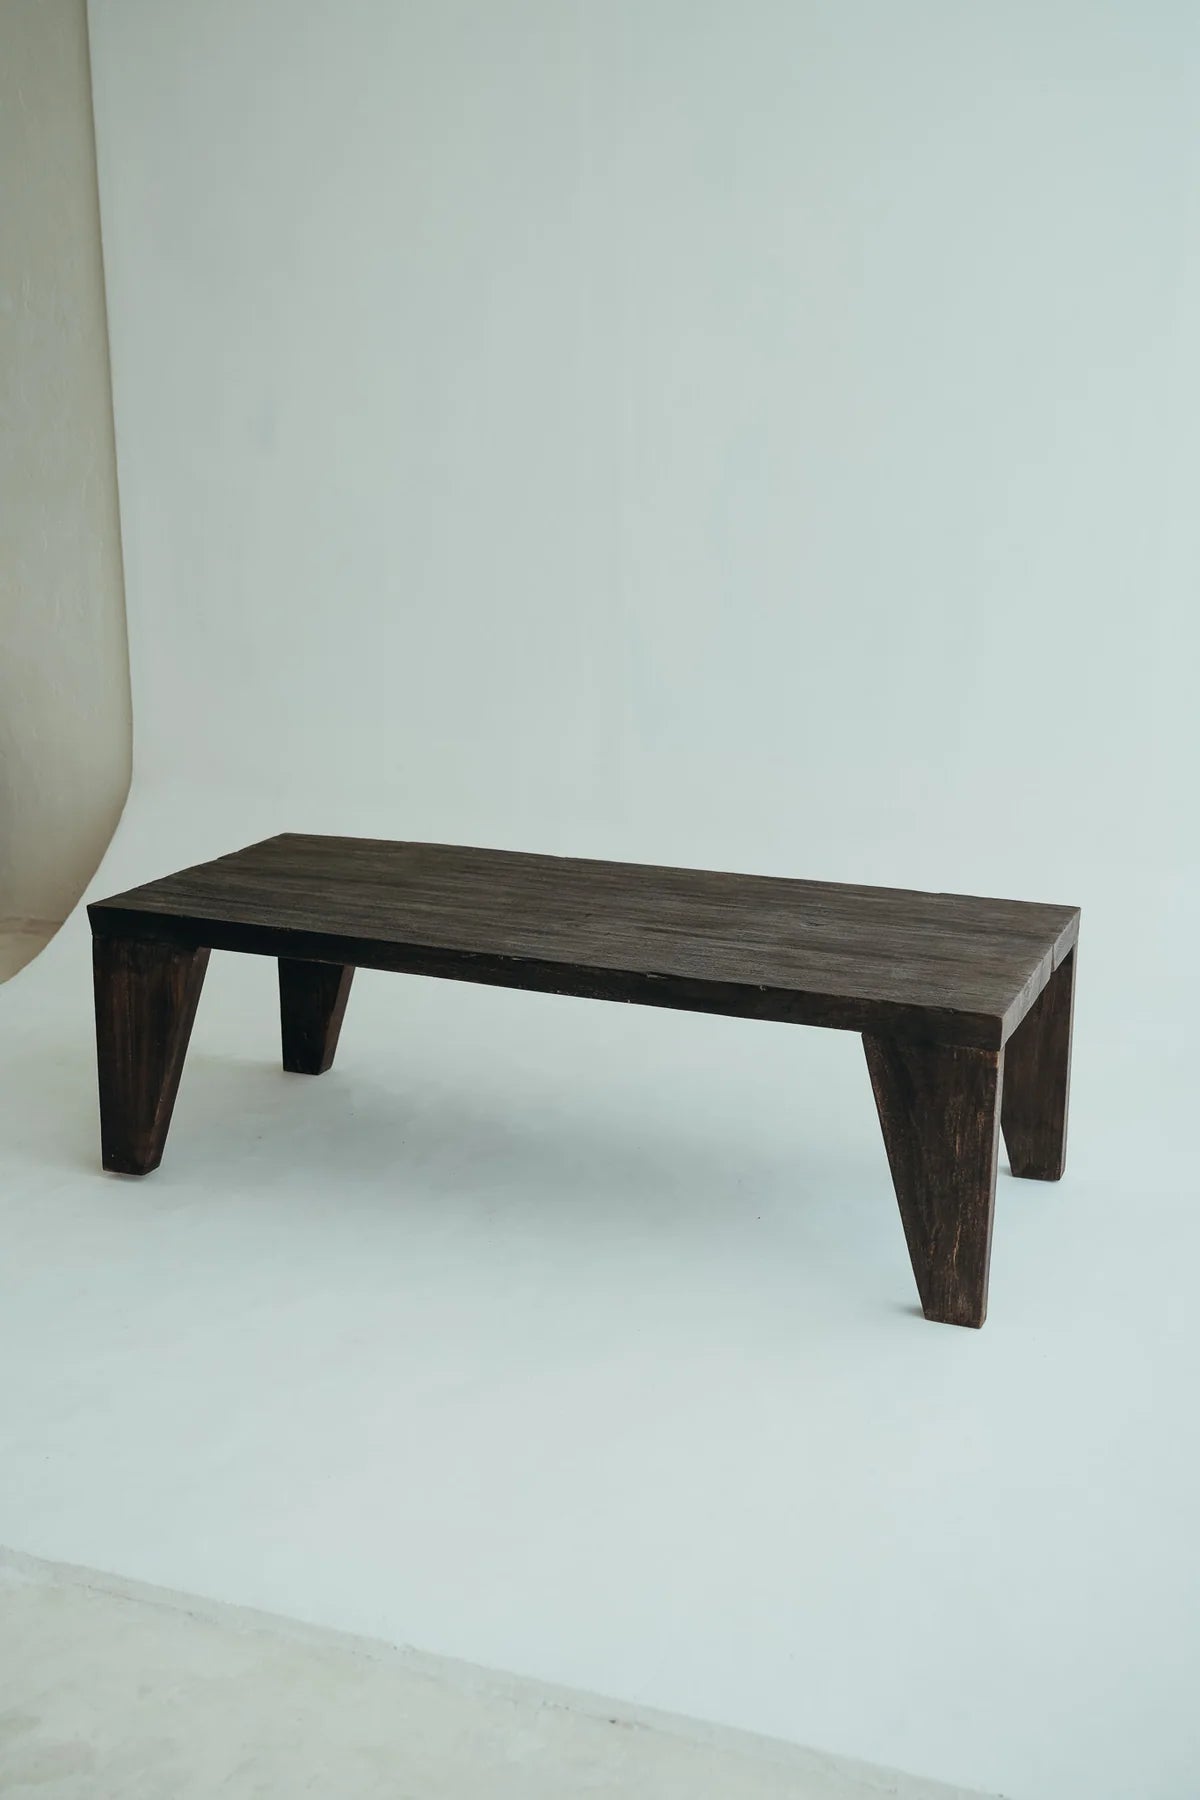 THE ALONSO TABLE - PRE ORDER